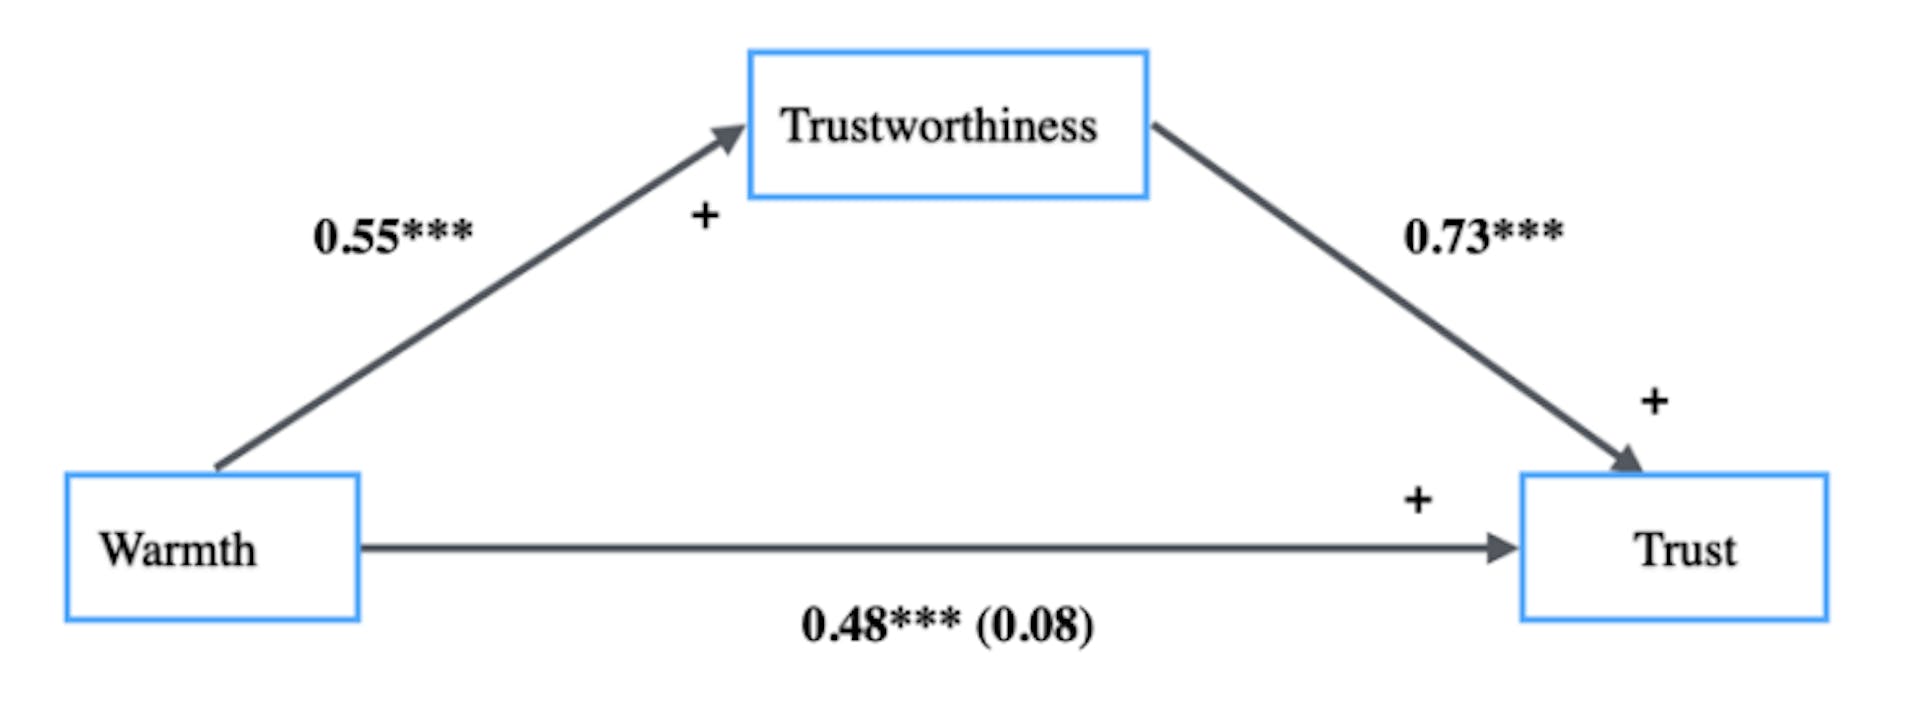 Fig. 2. Simple Mediation Results (Warmth - Trustworthiness - Trust).